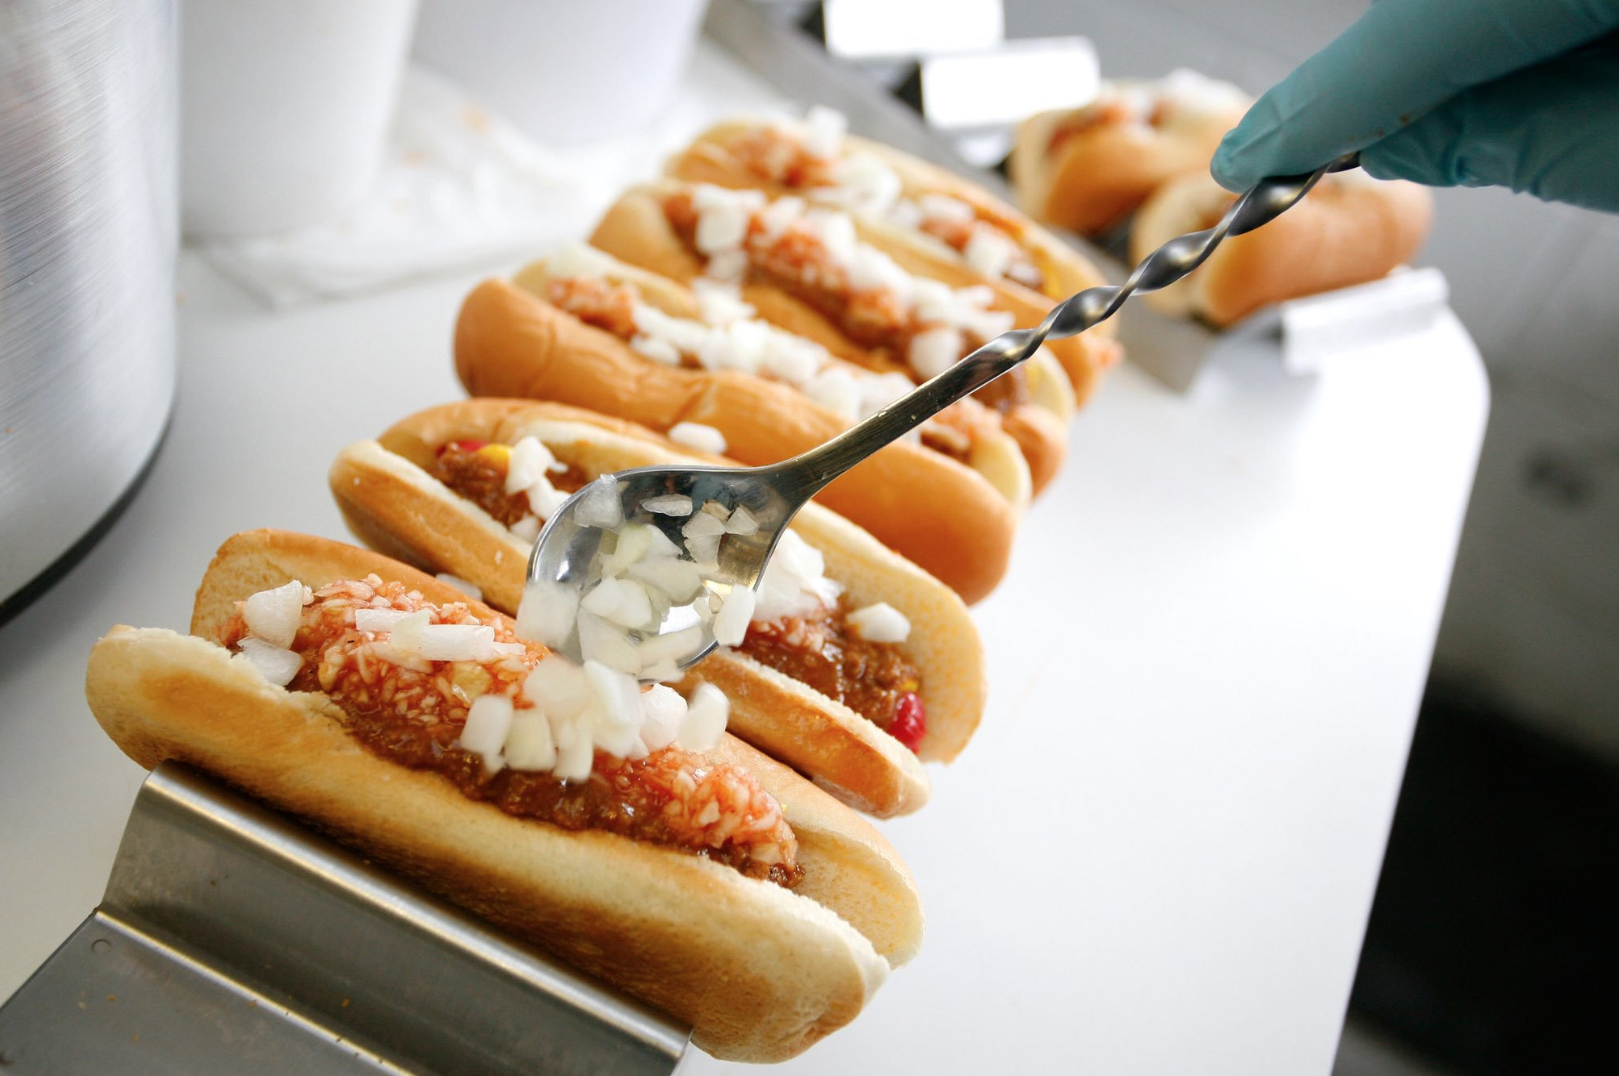 Hotdogs lined up with someone placing onions on them